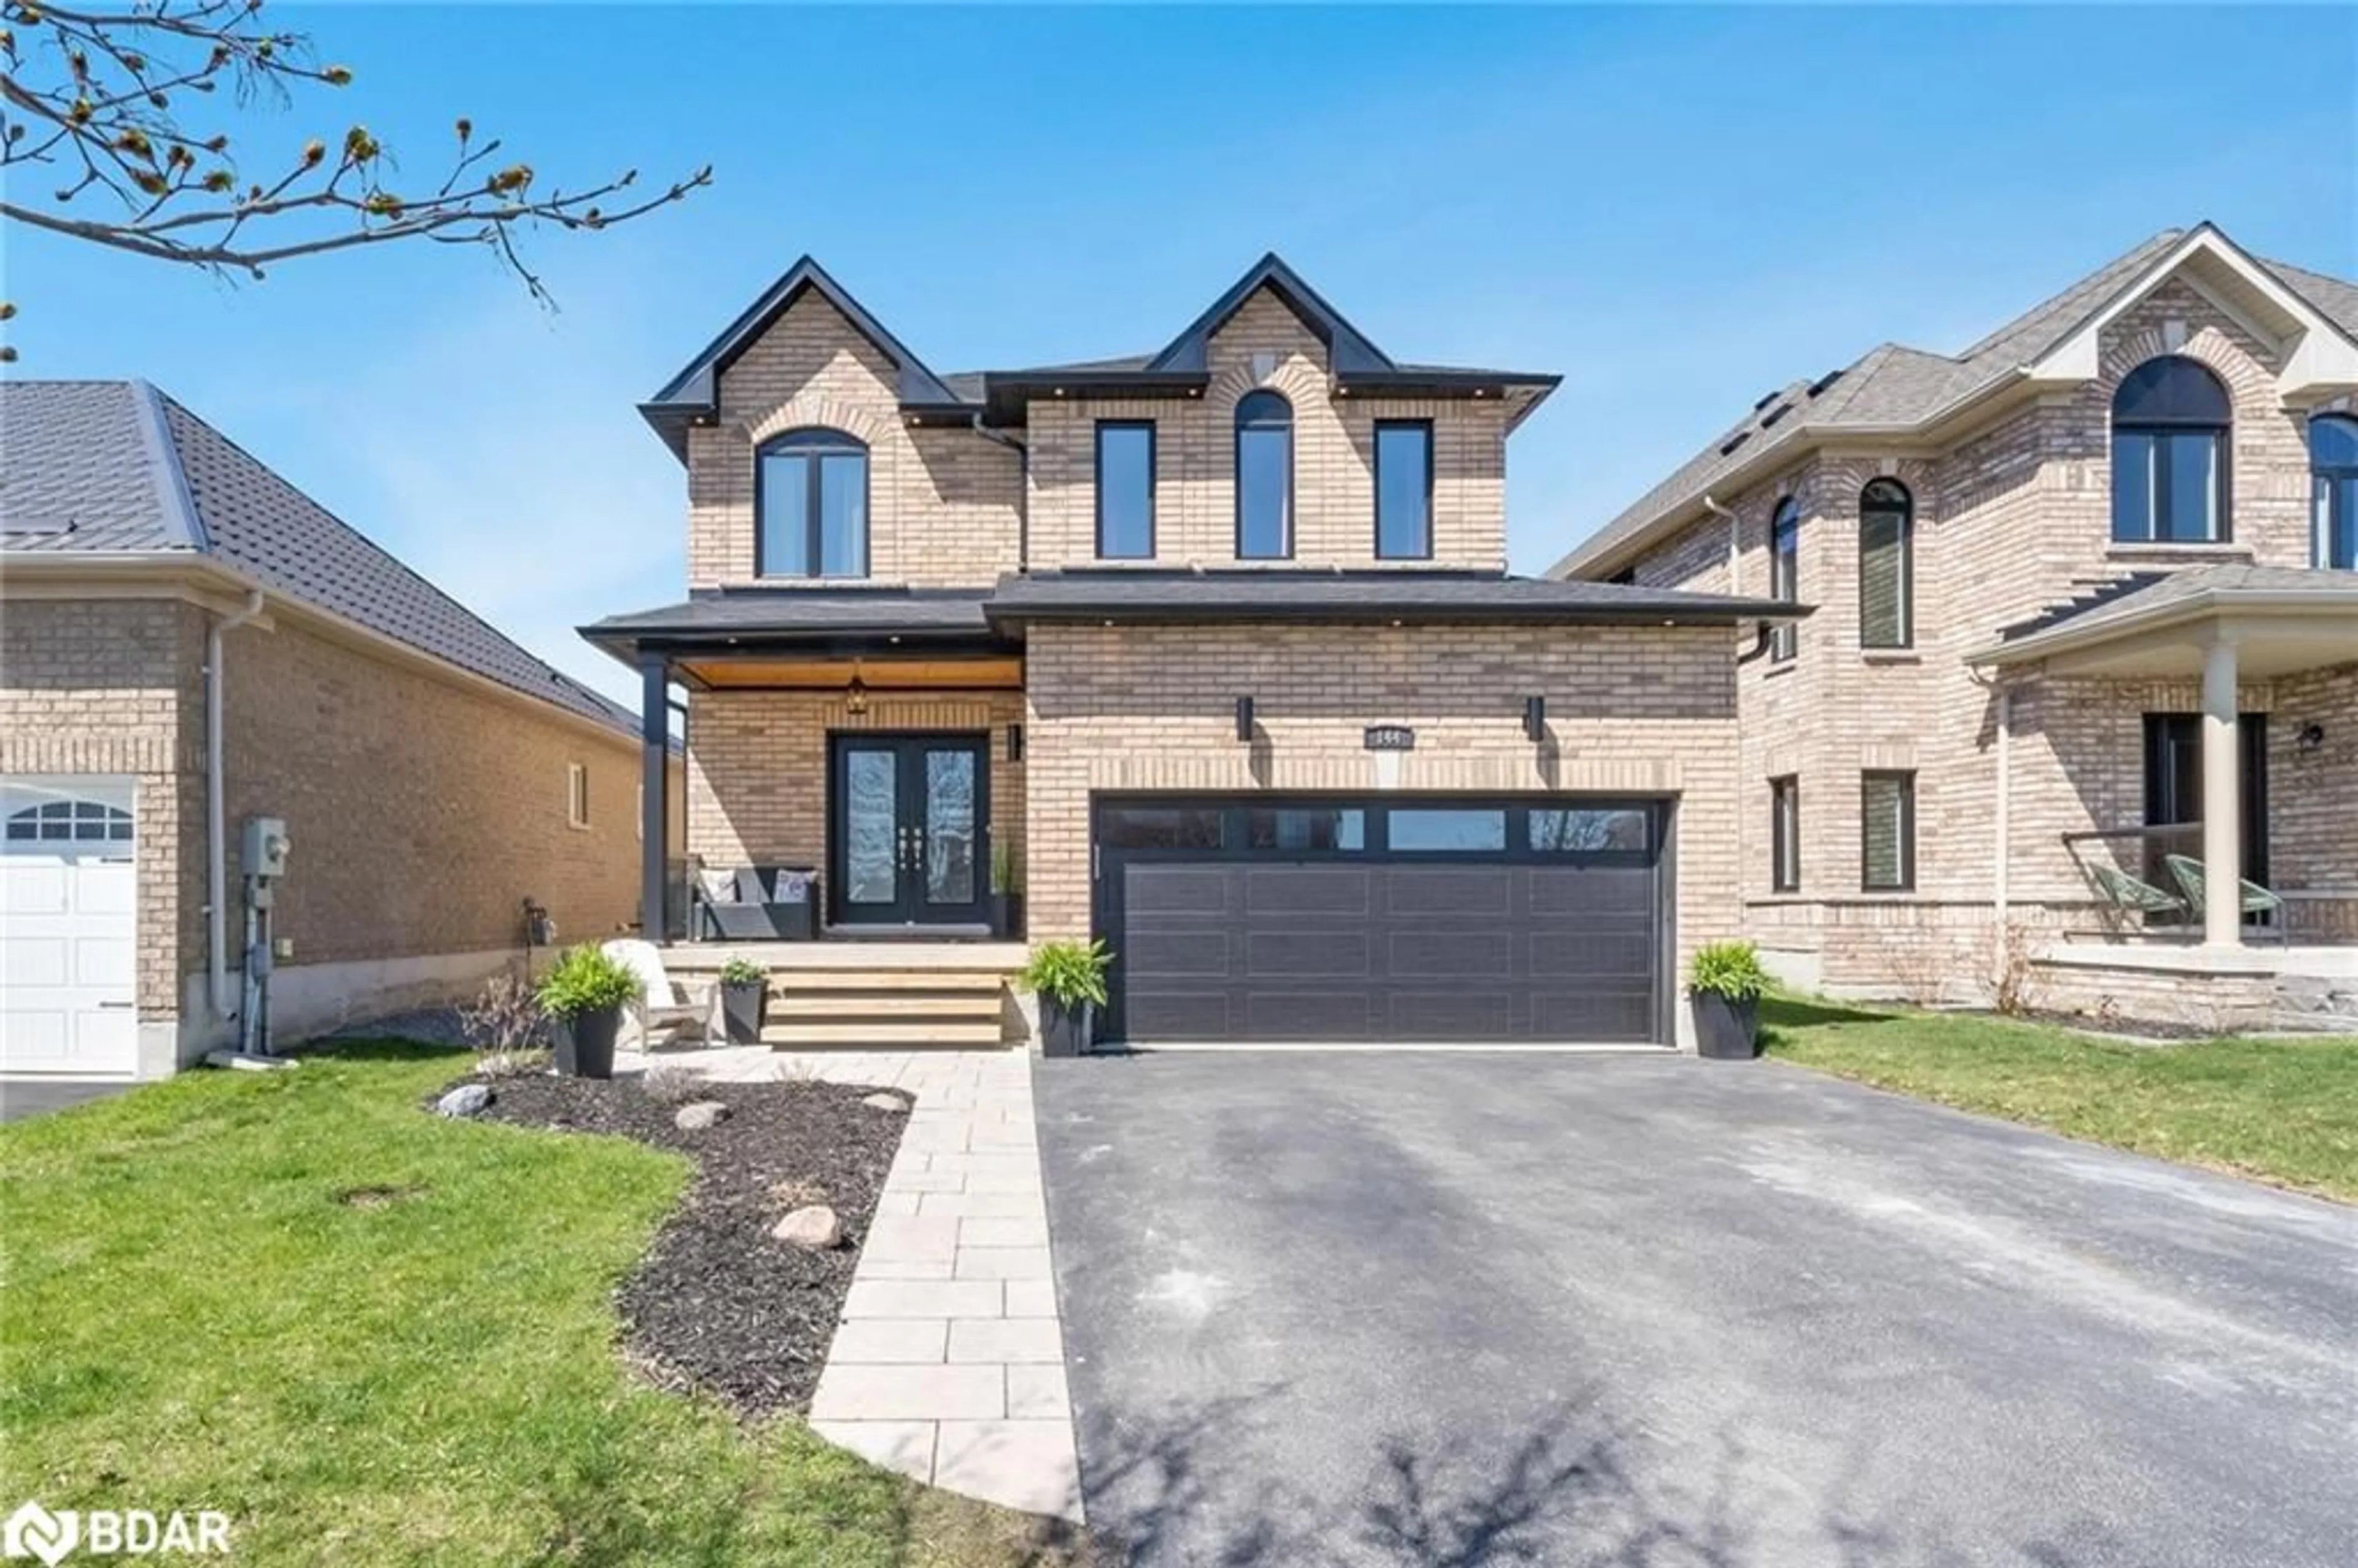 Home with brick exterior material for 144 Sovereign's Gate, Barrie Ontario L4M 0A3